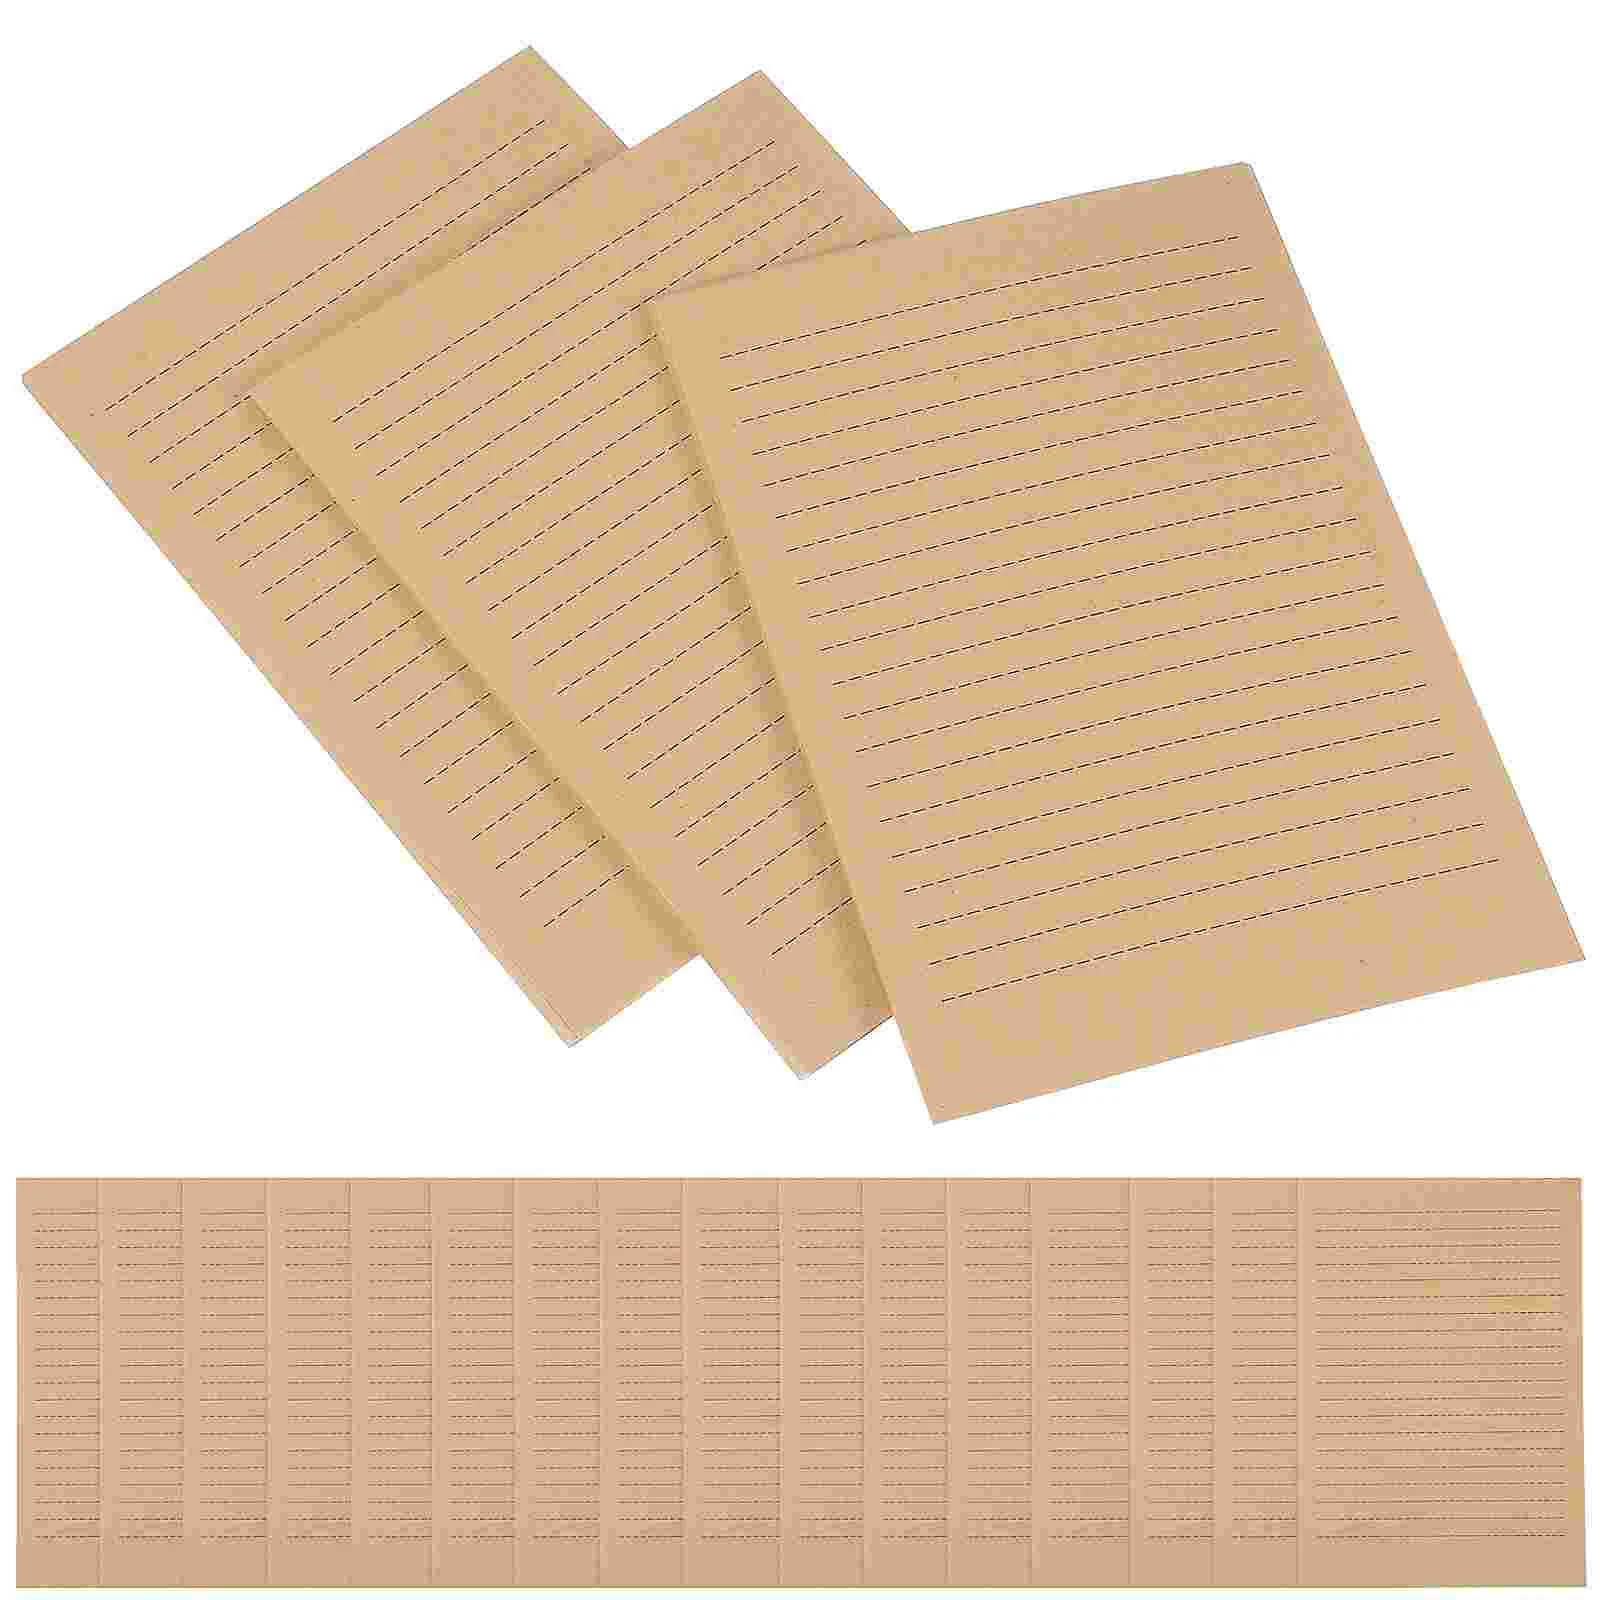 Vintage Kraft Stationary Paper A5 Size Lined Stationery Writing Letter Papers Bulk Personalized Letters